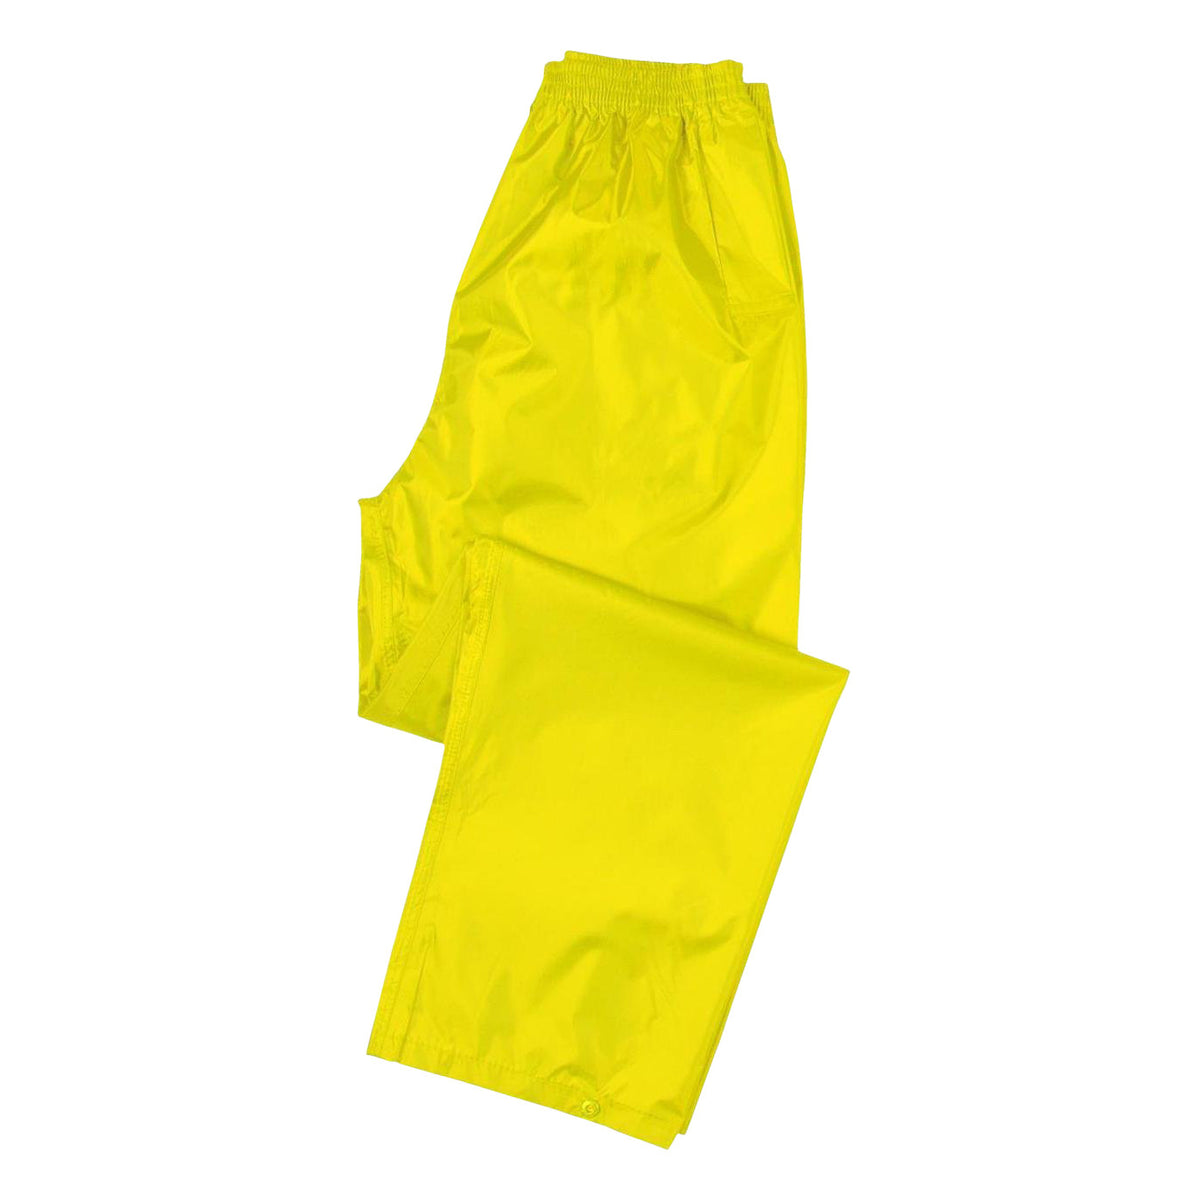 Overtrousers - peterdrew.com
 - 4